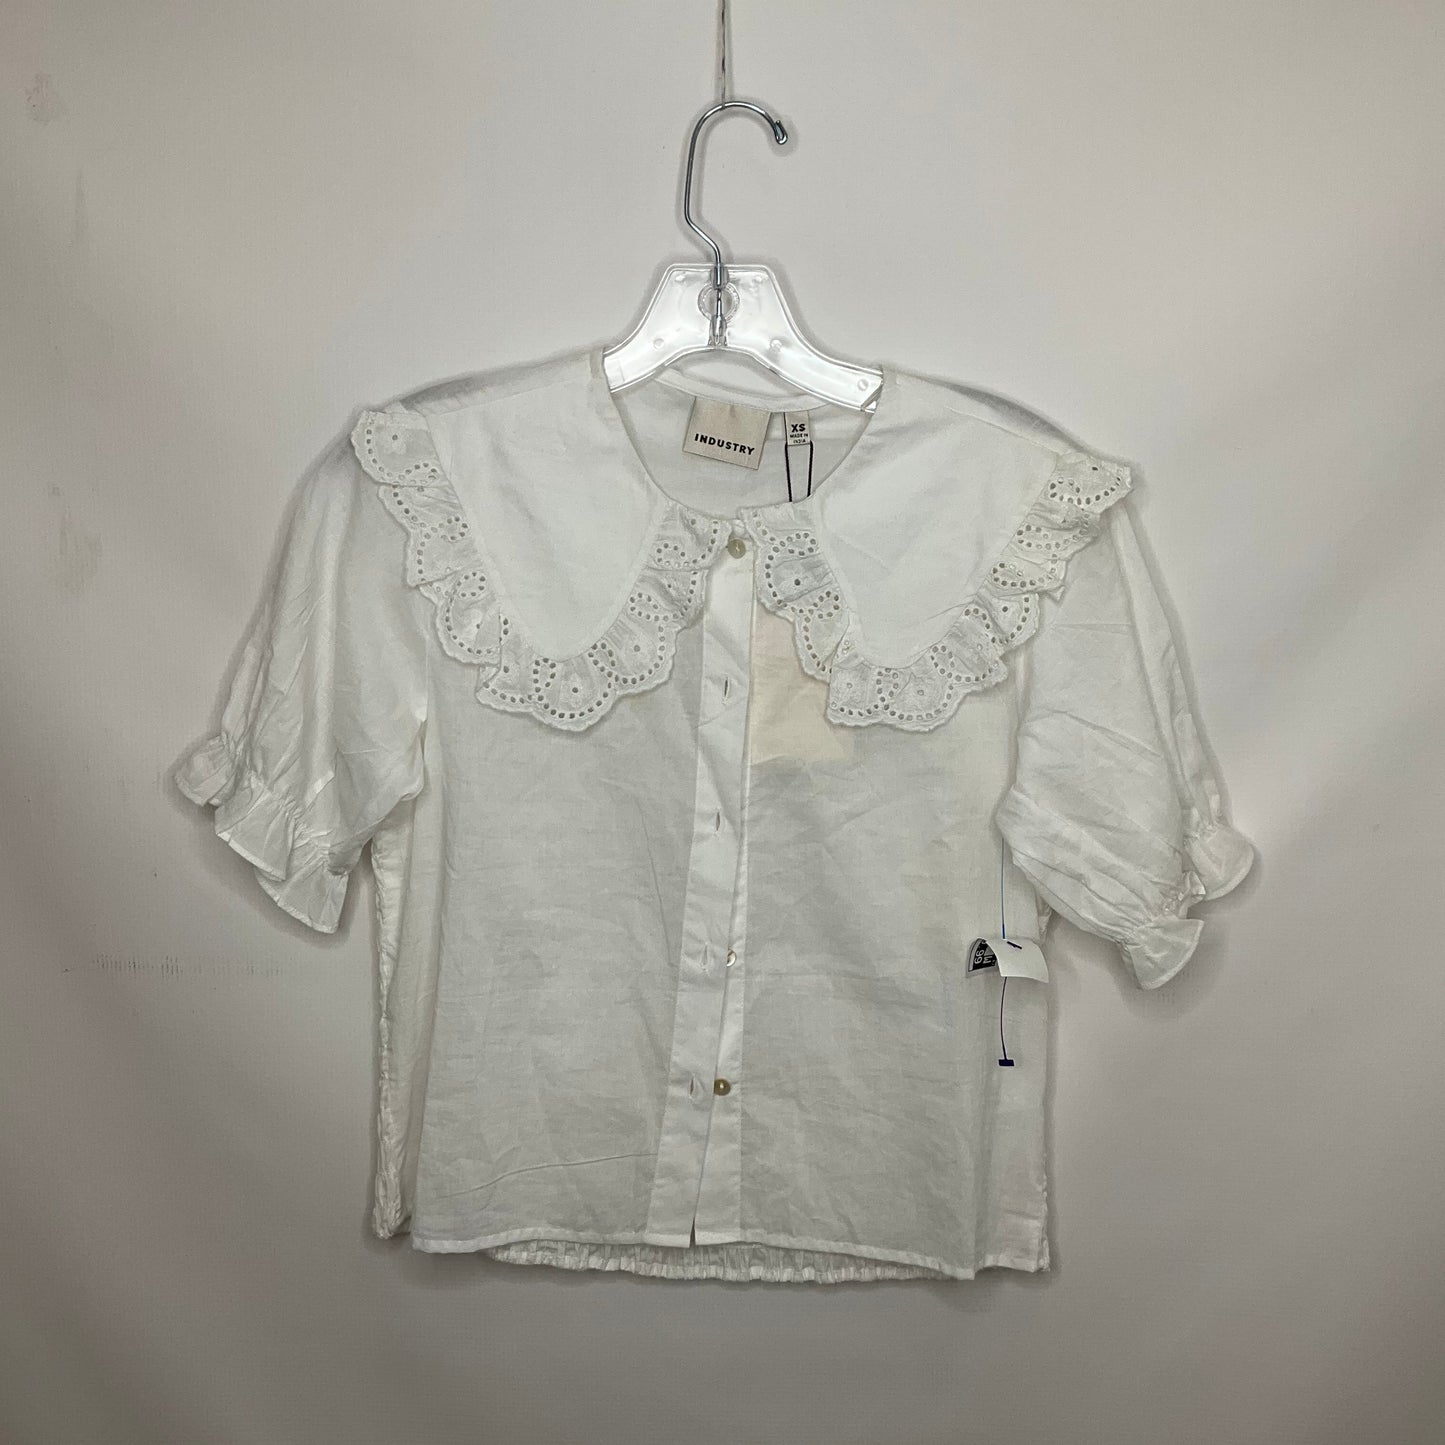 White Top Short Sleeve Clothes Mentor, Size Xs